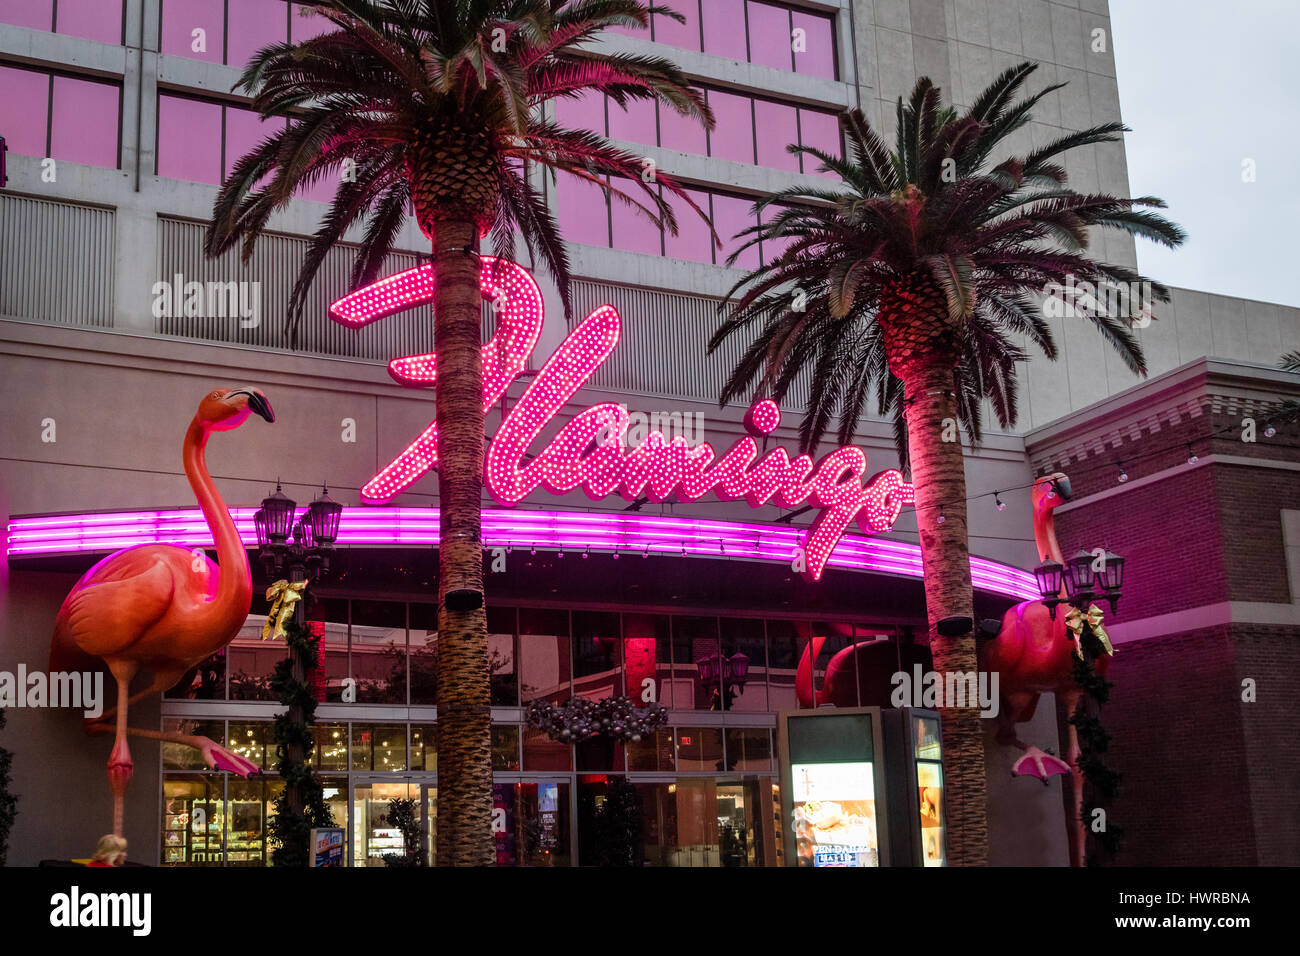 Flamingo Hotel Las Vegas High Resolution Stock Photography And Images Alamy